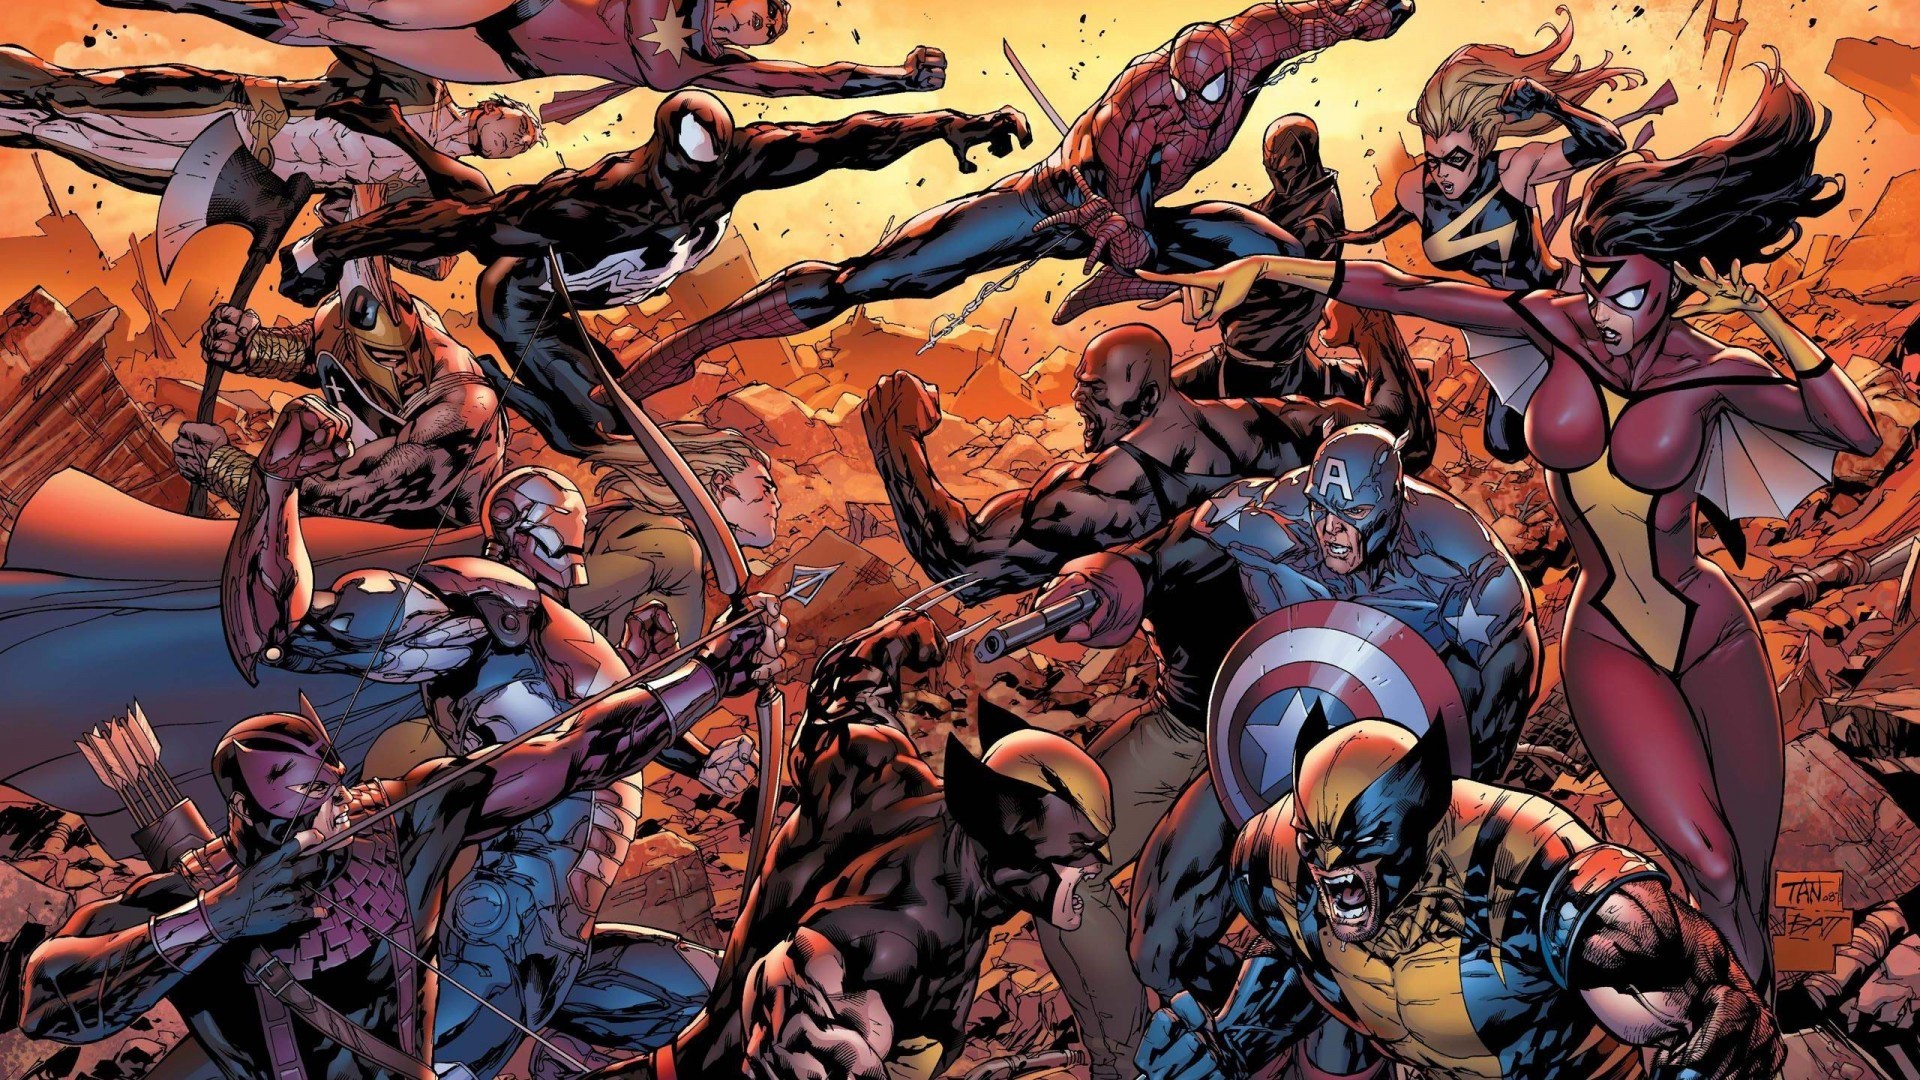 1920x1080 Marvel Comics HD HD Wallpapers Collection: Item 5585277 - HD Wallpapers